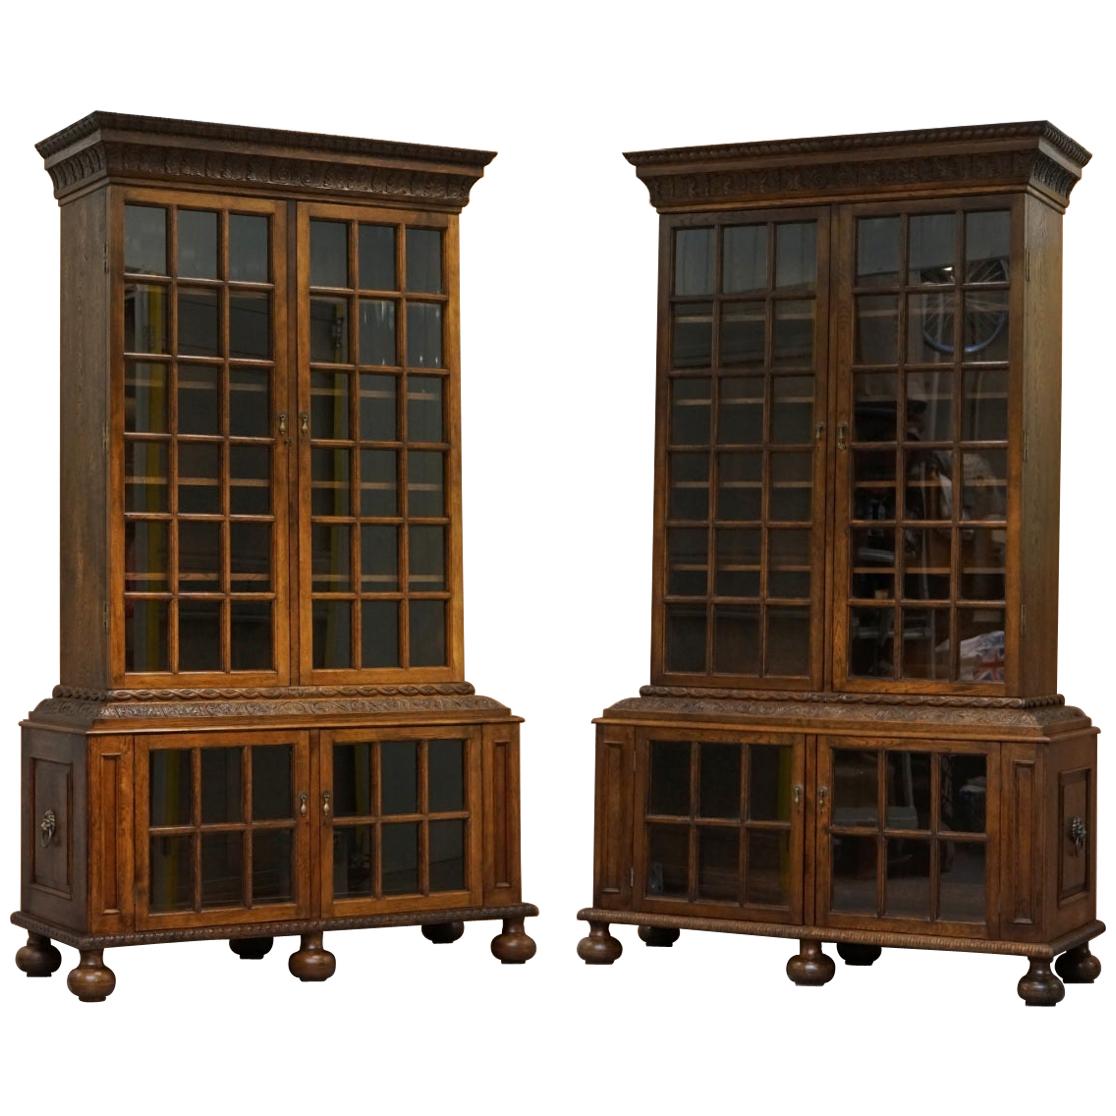 Samuel Pepys 1666 Oak Library Bookcases Pair High Provenance Carved by Forsyth